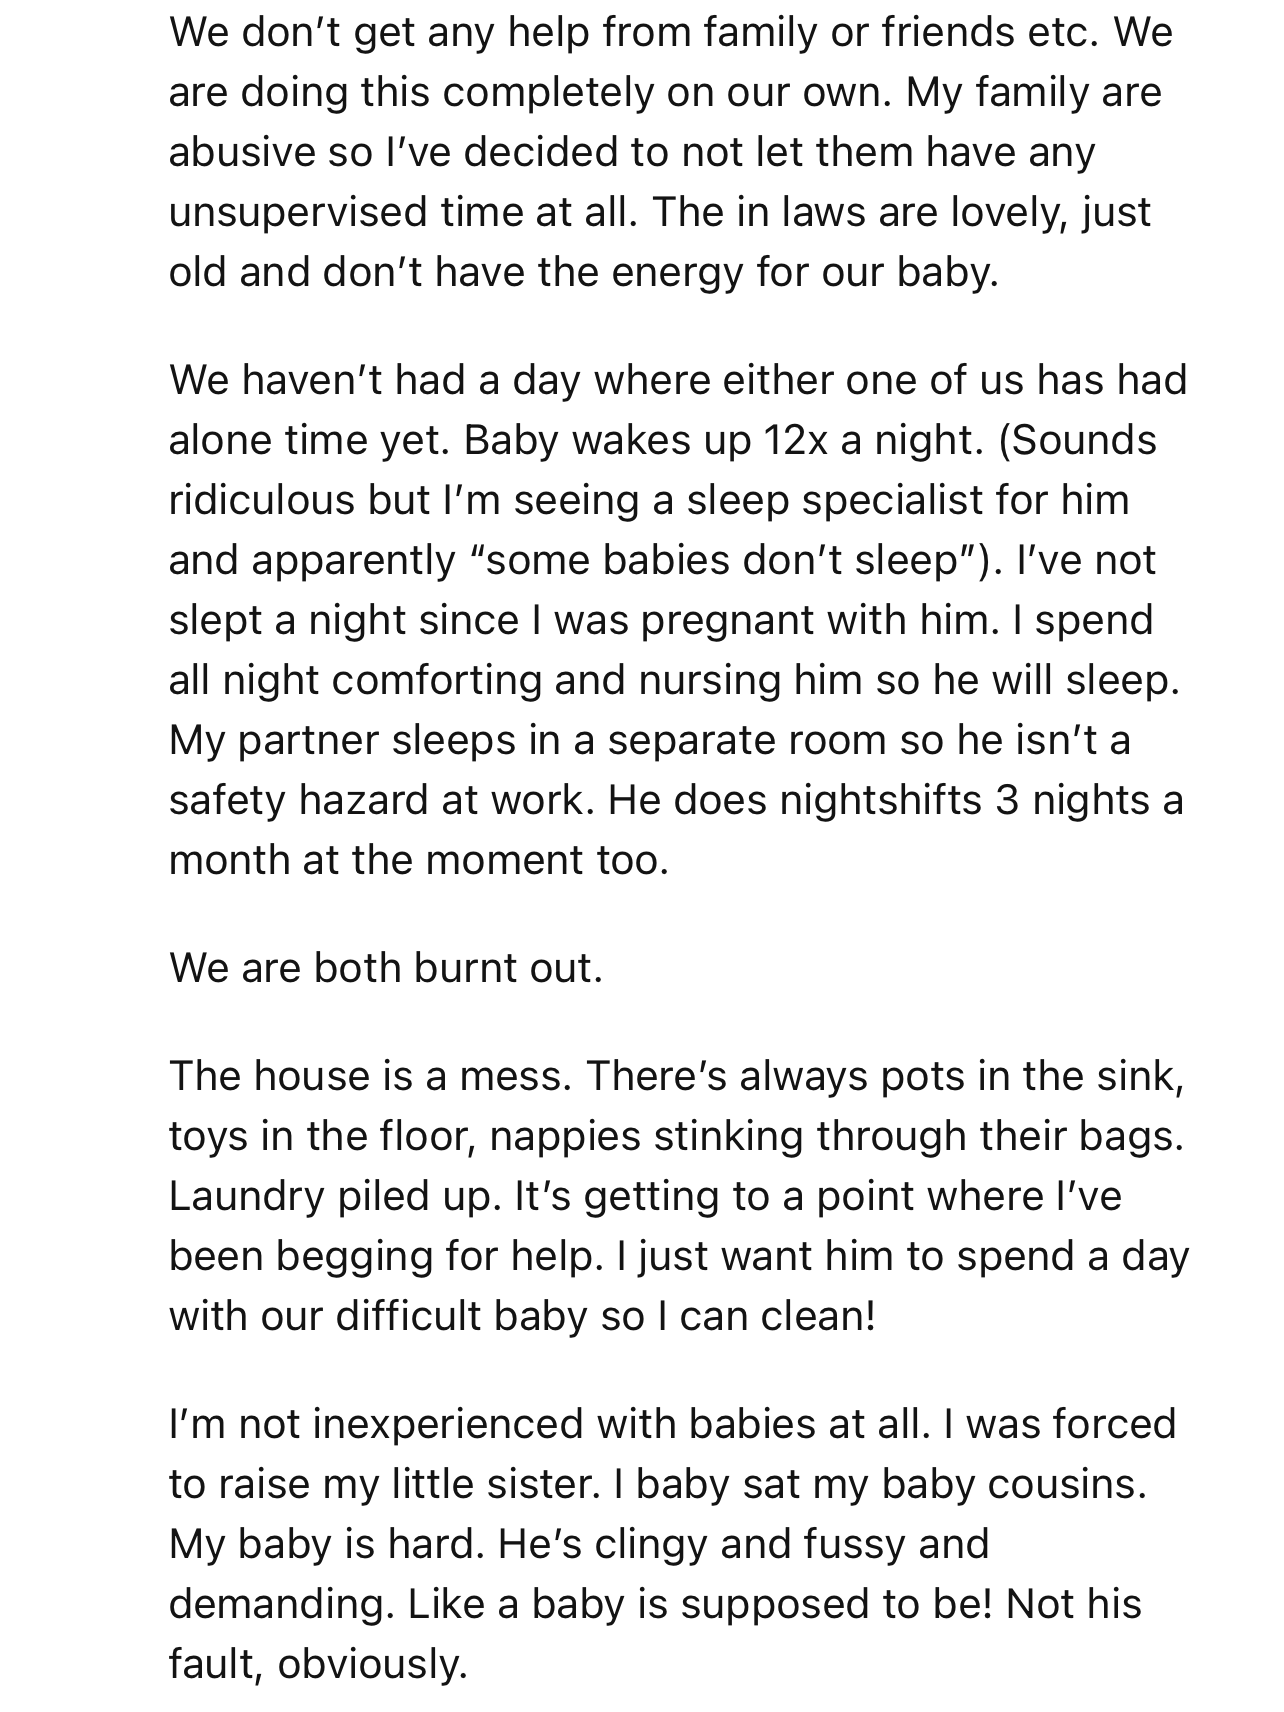 Catering to the baby alone has been very difficult for OP and she wants her husband to help out a bit